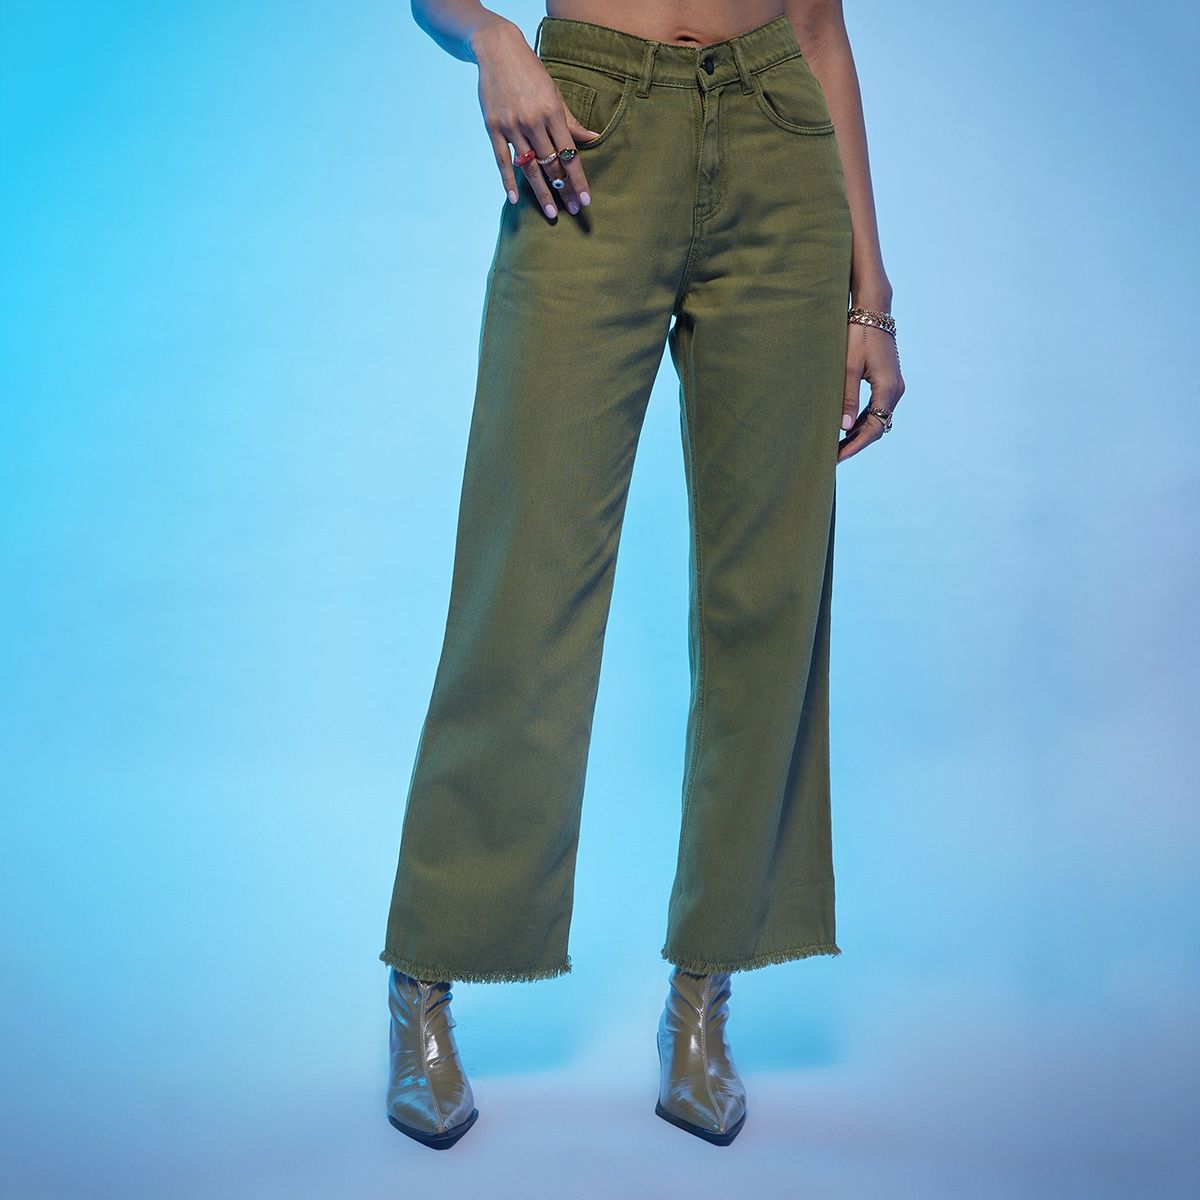 Zara Green High Waisted Pants With White OffShoulder Top